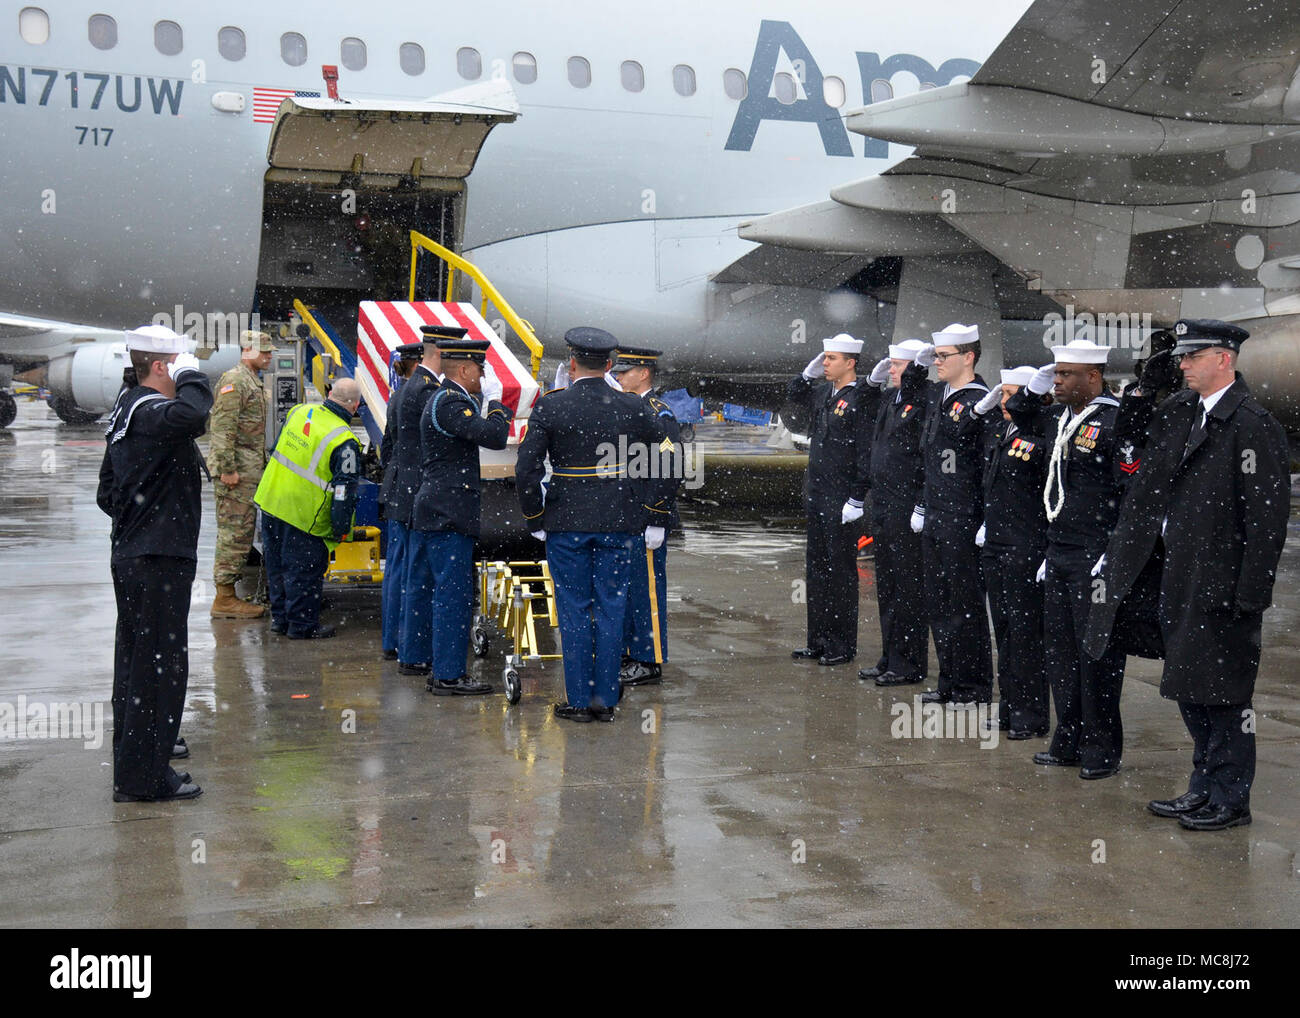 BOSTON (Apr. 2, 2018) The Military Funeral Honors Team of the Massachusetts Army National Guard load the casket of Medal of Honor Recipient Capt. Thomas J. Hudner, Jr., USN, onto a plane for transport to Arlington National Cemetery for his final internment. Capt. Hudner, a naval aviator, received the Medal of Honor for his actions during the Battle of the Chosin Reservoir during the Korean War. Stock Photo